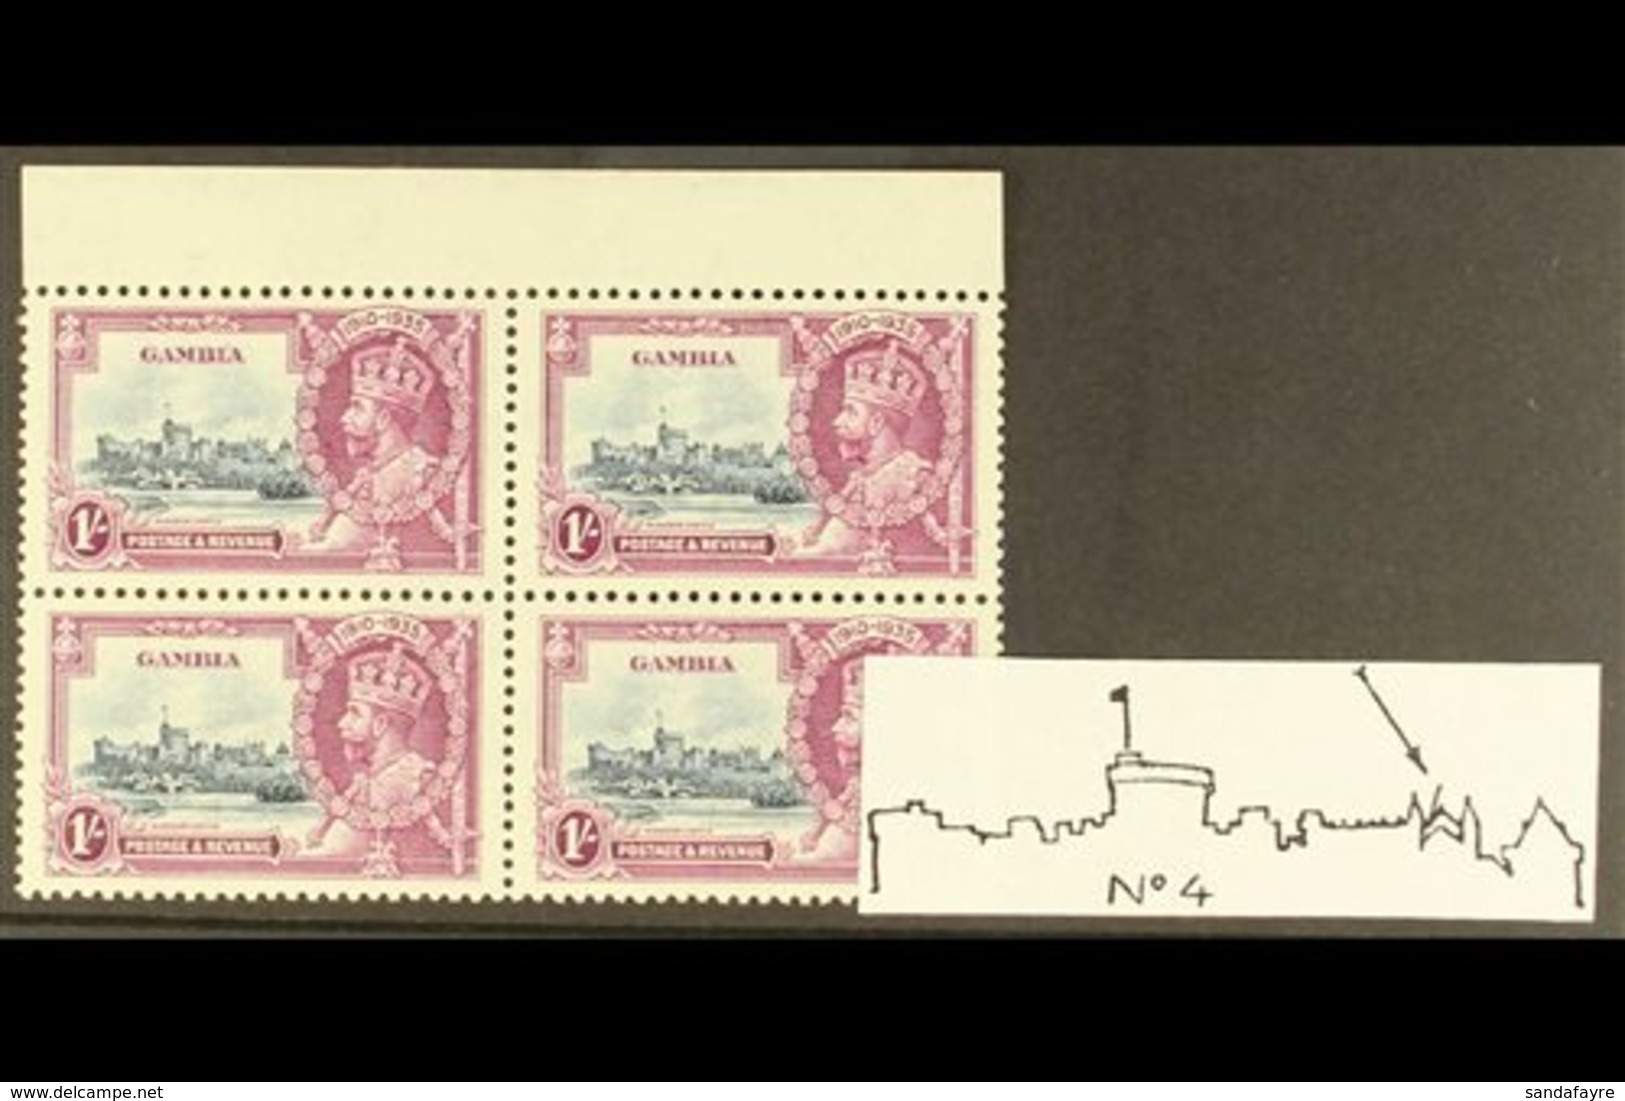 1935 1s Slate And Purple, Jubilee, Top Marginal Block Of 4 Showing The Variety "Lightening Conductor" By Left Spire Of S - Gambia (...-1964)